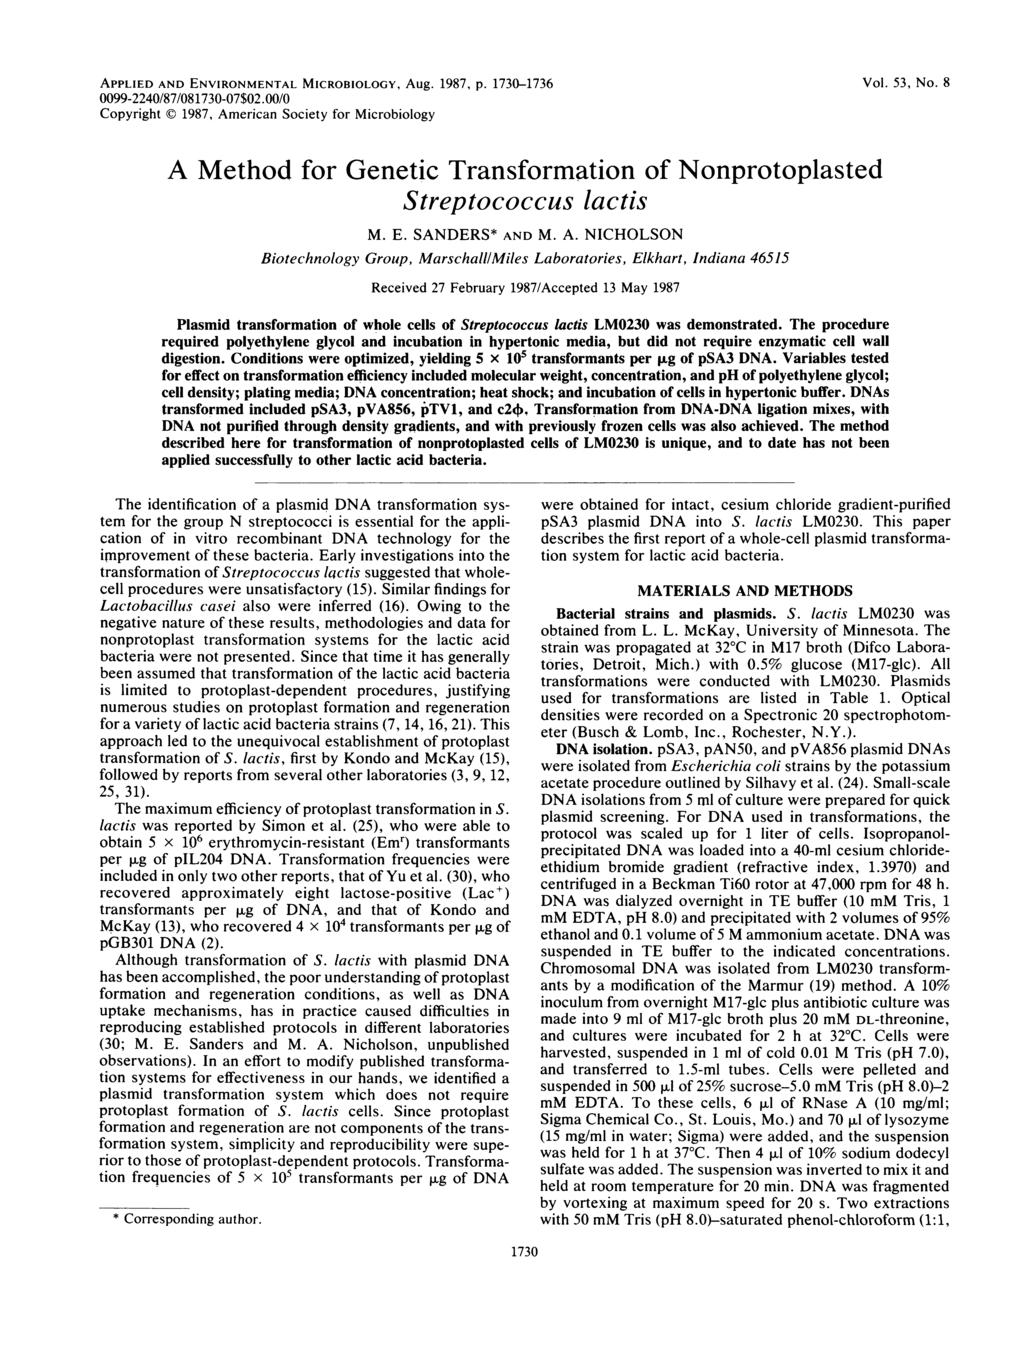 APPLIED AND ENVIRONMENTAL MICROBIOLOGY, Aug. 1987, p. 173-1736 99-224/87/8173-7$2./ Copyright 1987, American Society for Microbiology Vol. 53, No.